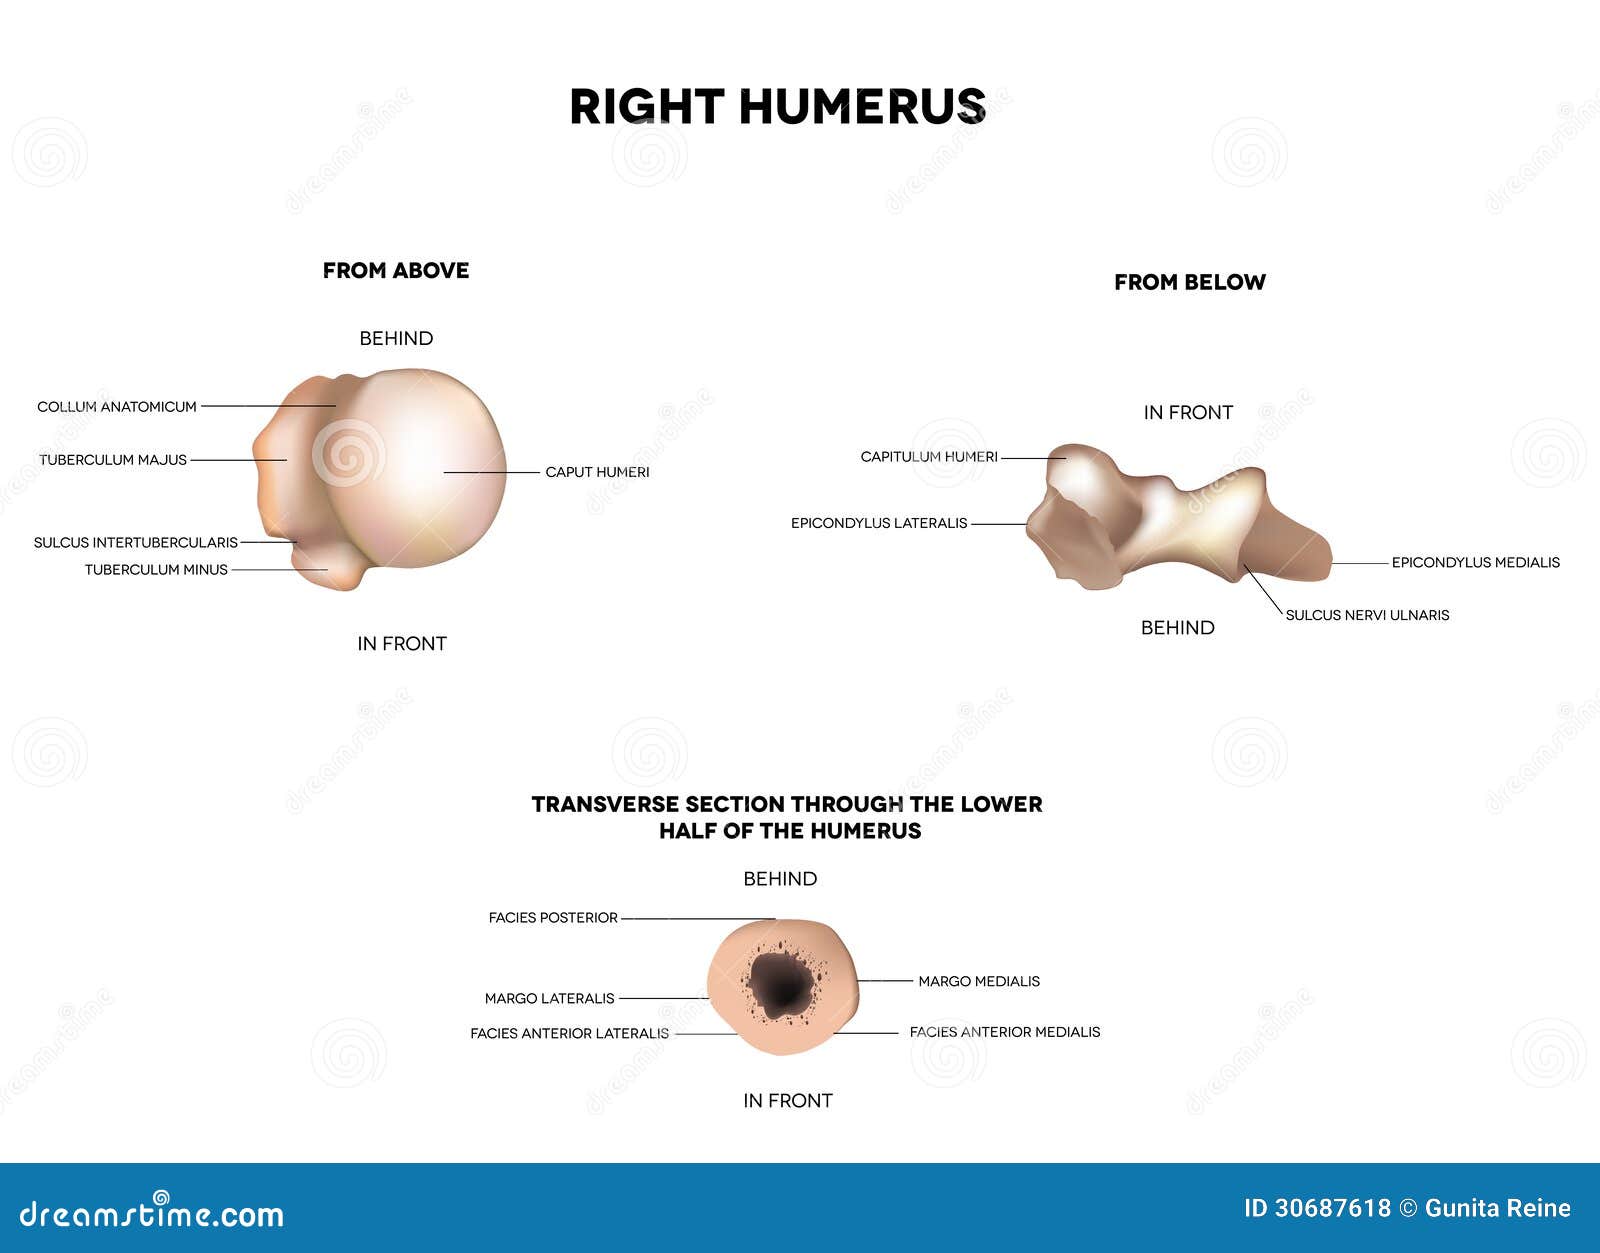 humerus- from above, below, transverse section